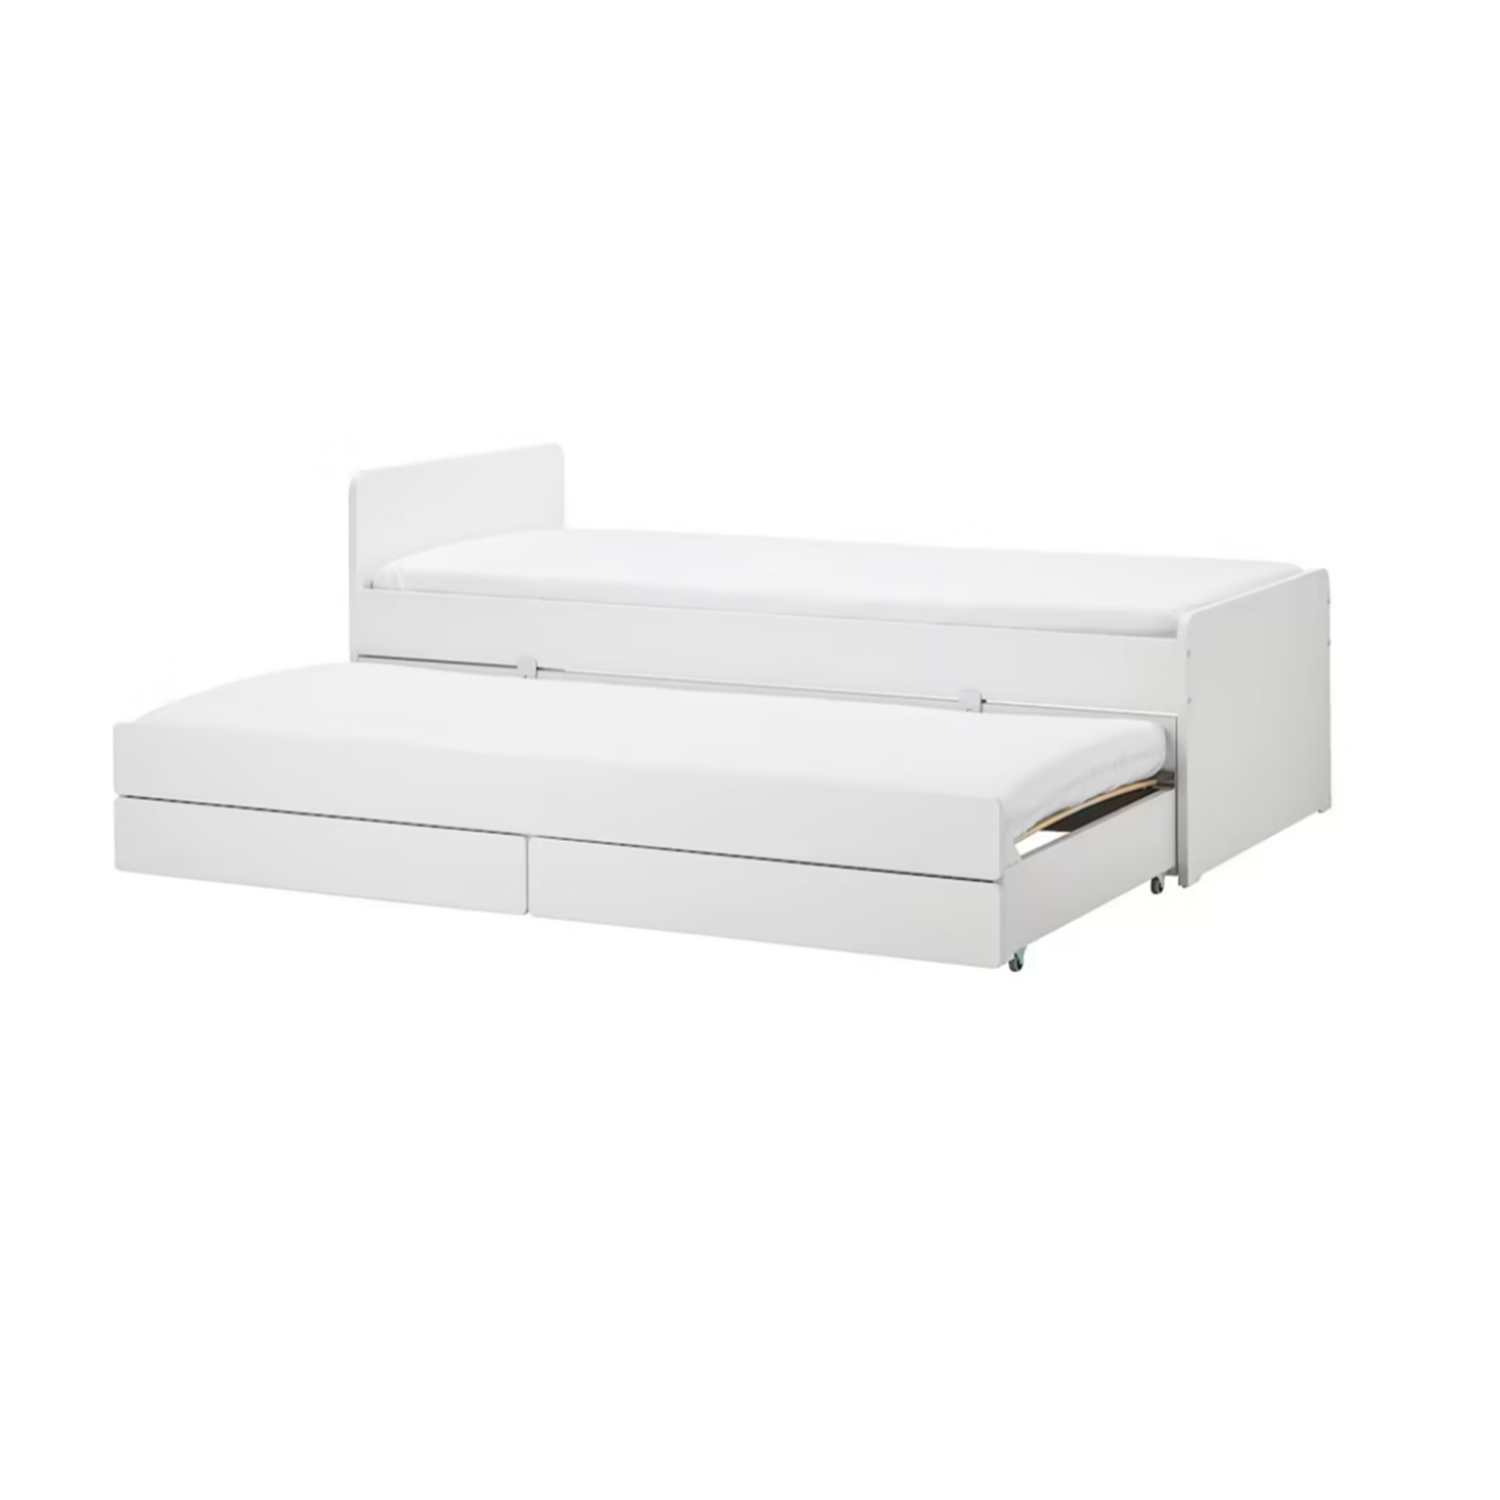 Ikea SLÄKT Bed frame w/pull-out bed + storage